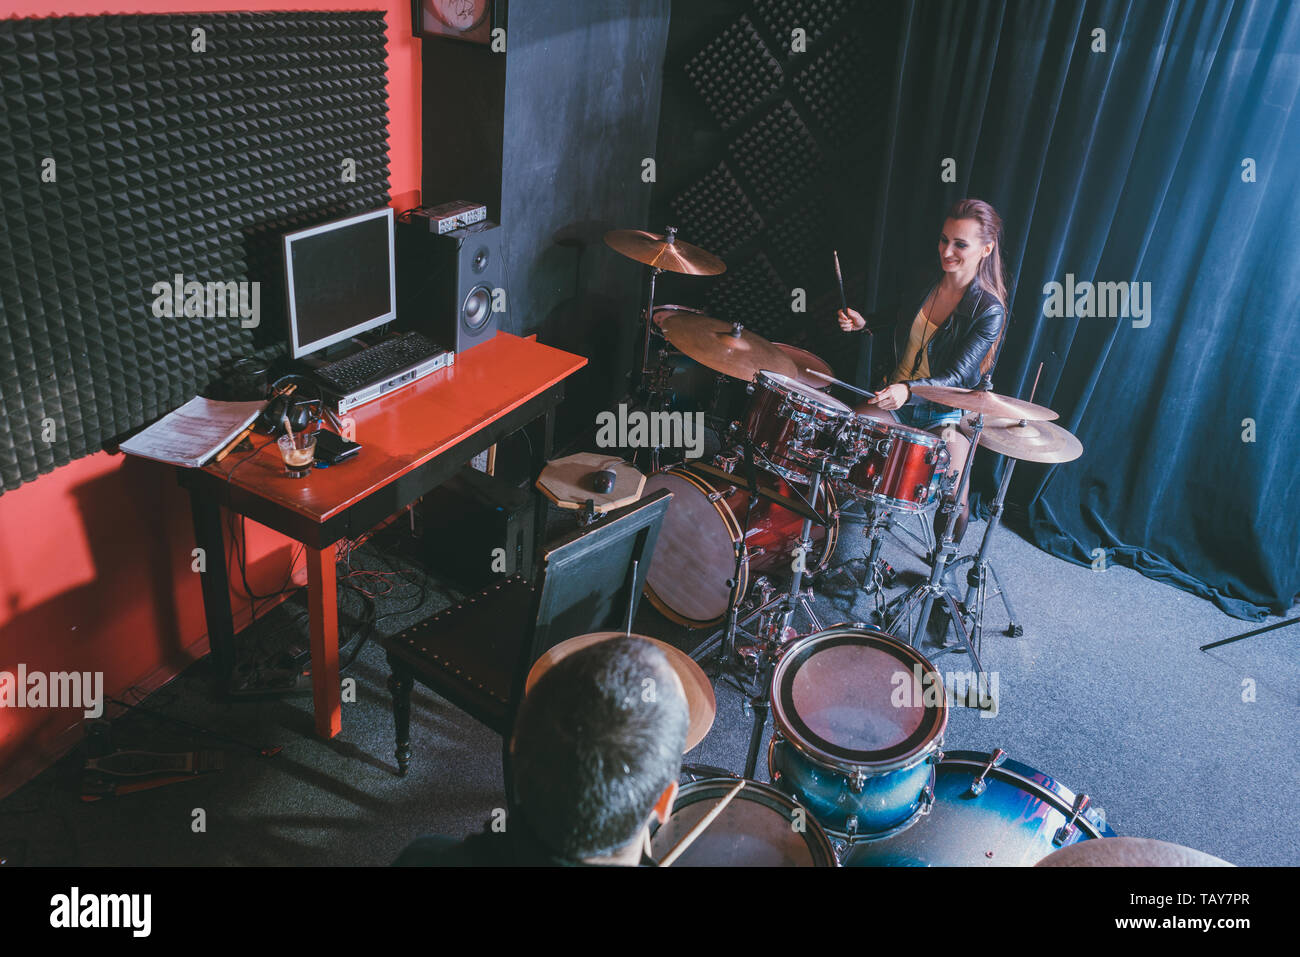 Woman receiving drum lessons from her music teacher Stock Photo